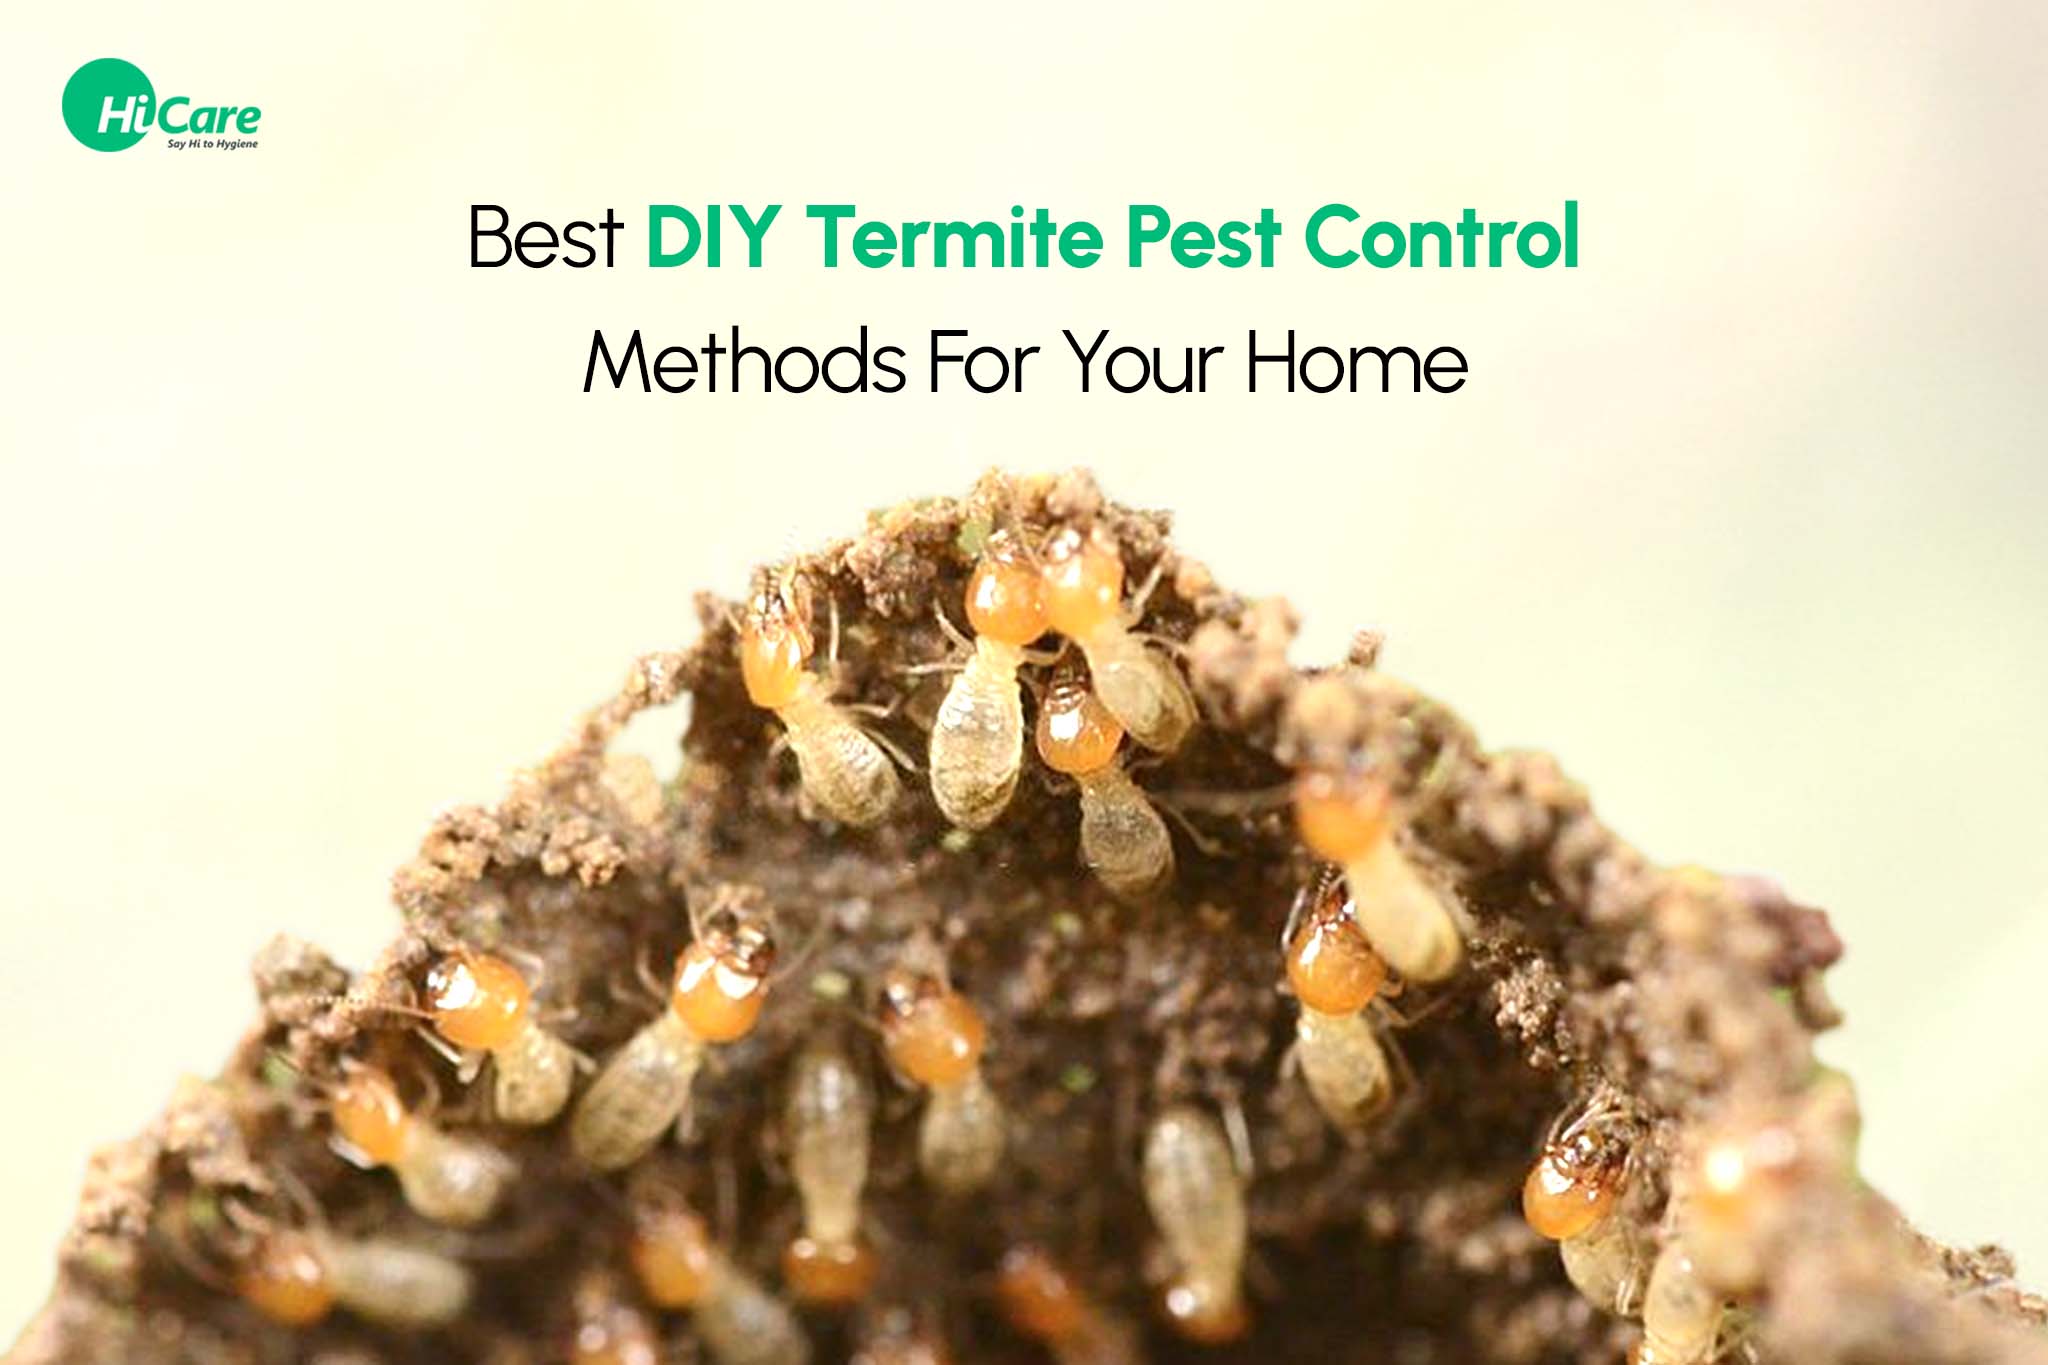 5 Best DIY Termite Pest Control Methods For Your Home